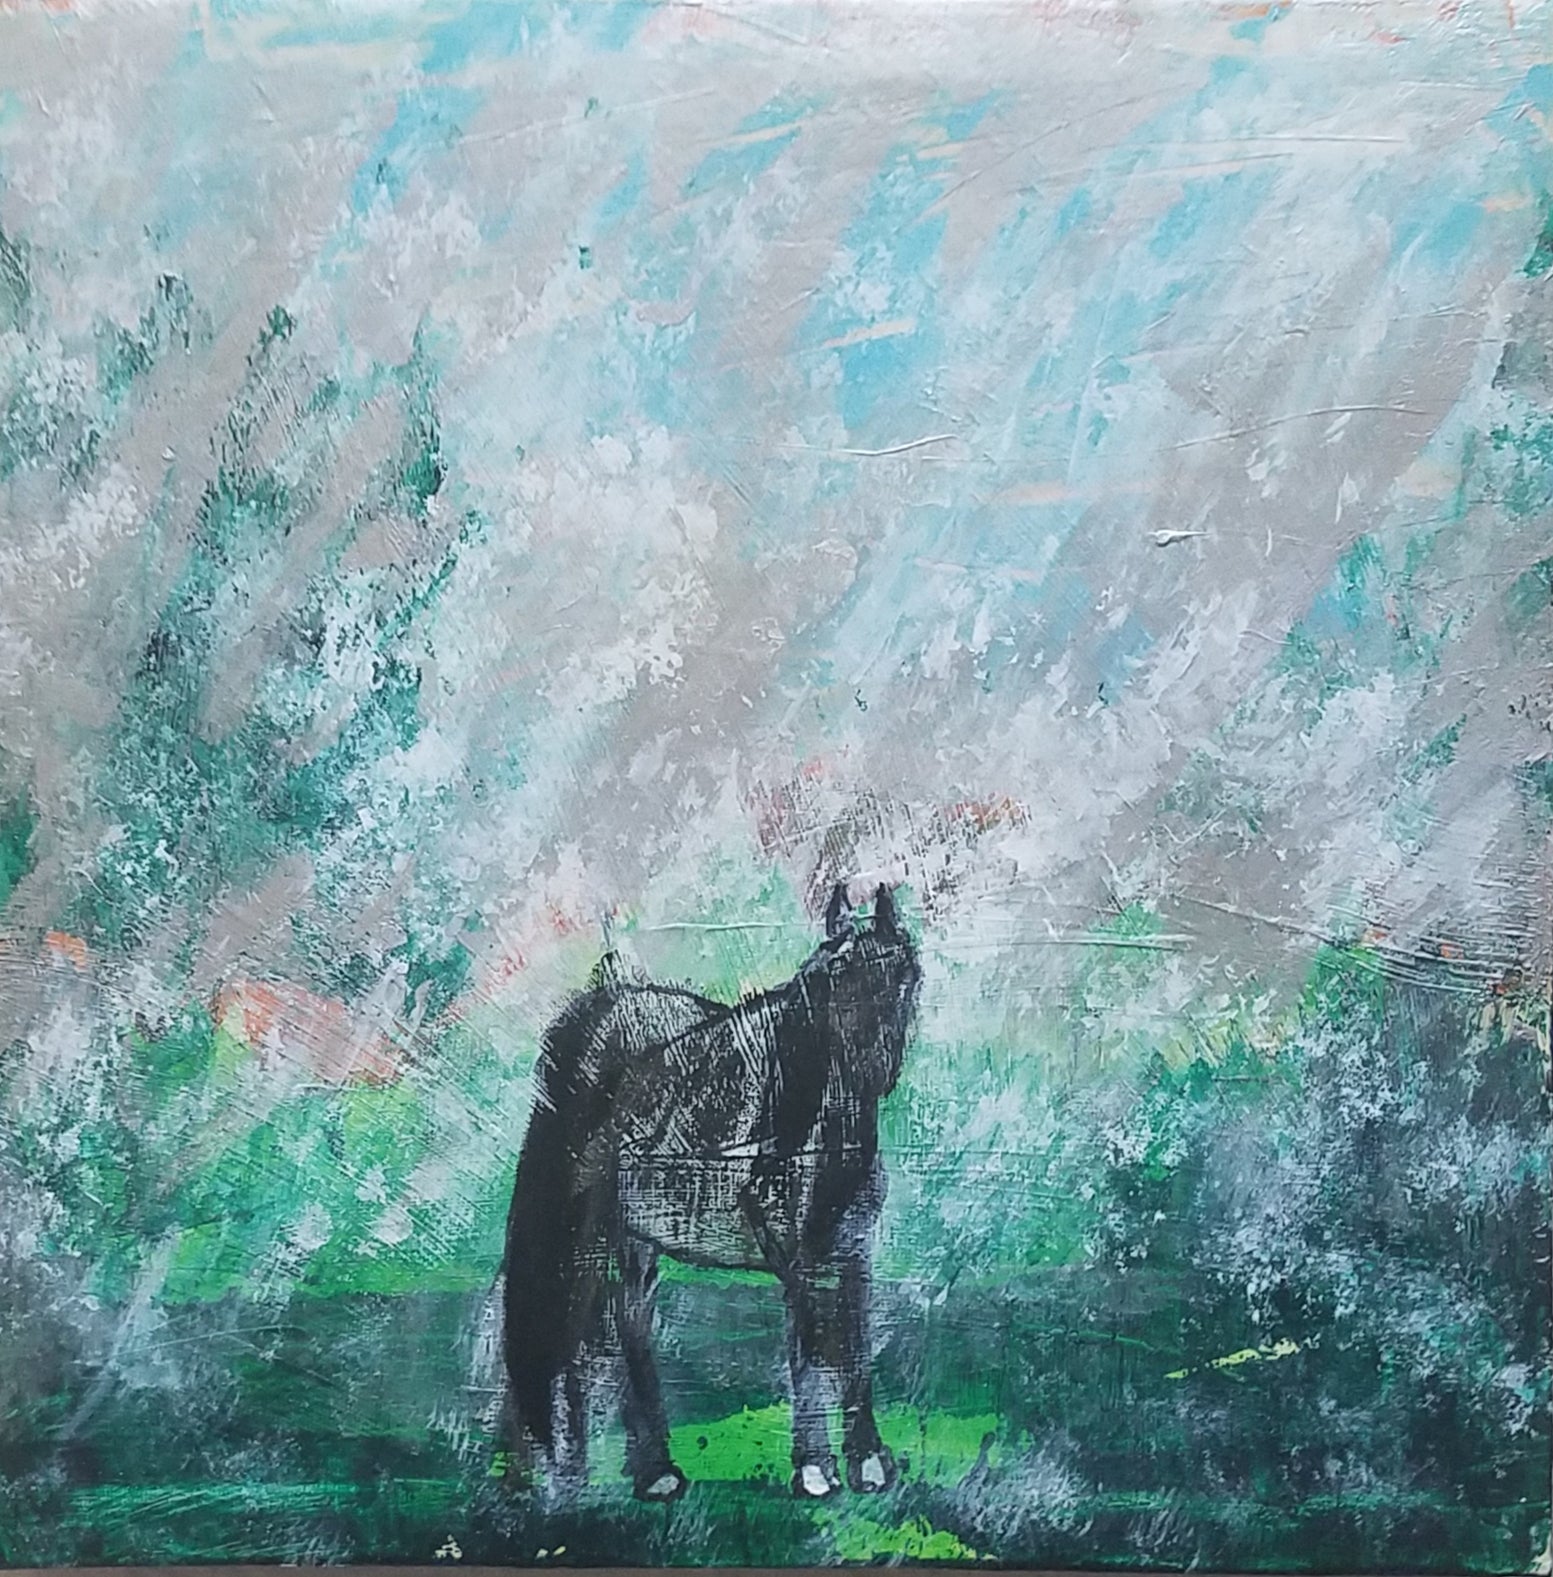 Blue Roan Horse in Rain by Mark San Souci - 2021 Honorable Mention Award